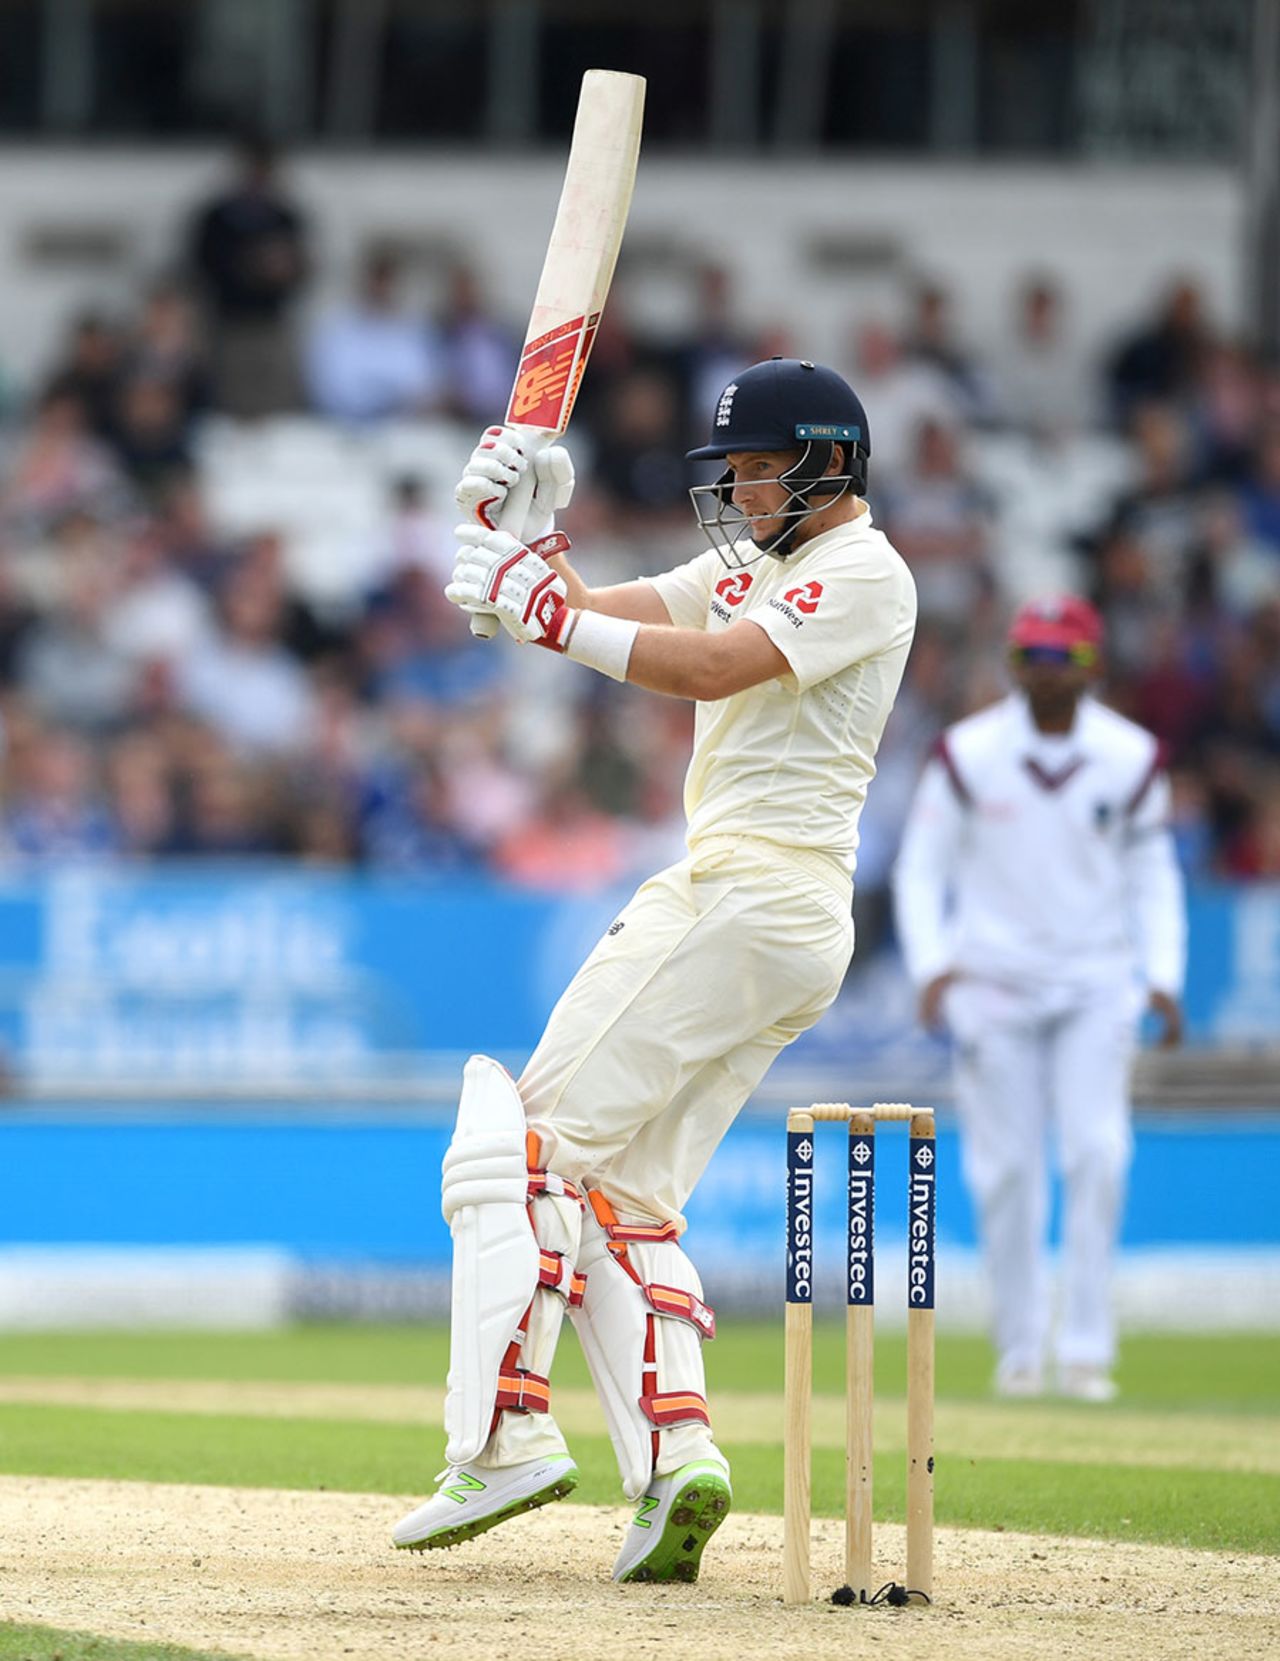 Joe Root pulls during his record-equalling innings, England v West Indies, 2nd Investec Test, Headingley, 1st day, August 25, 2017